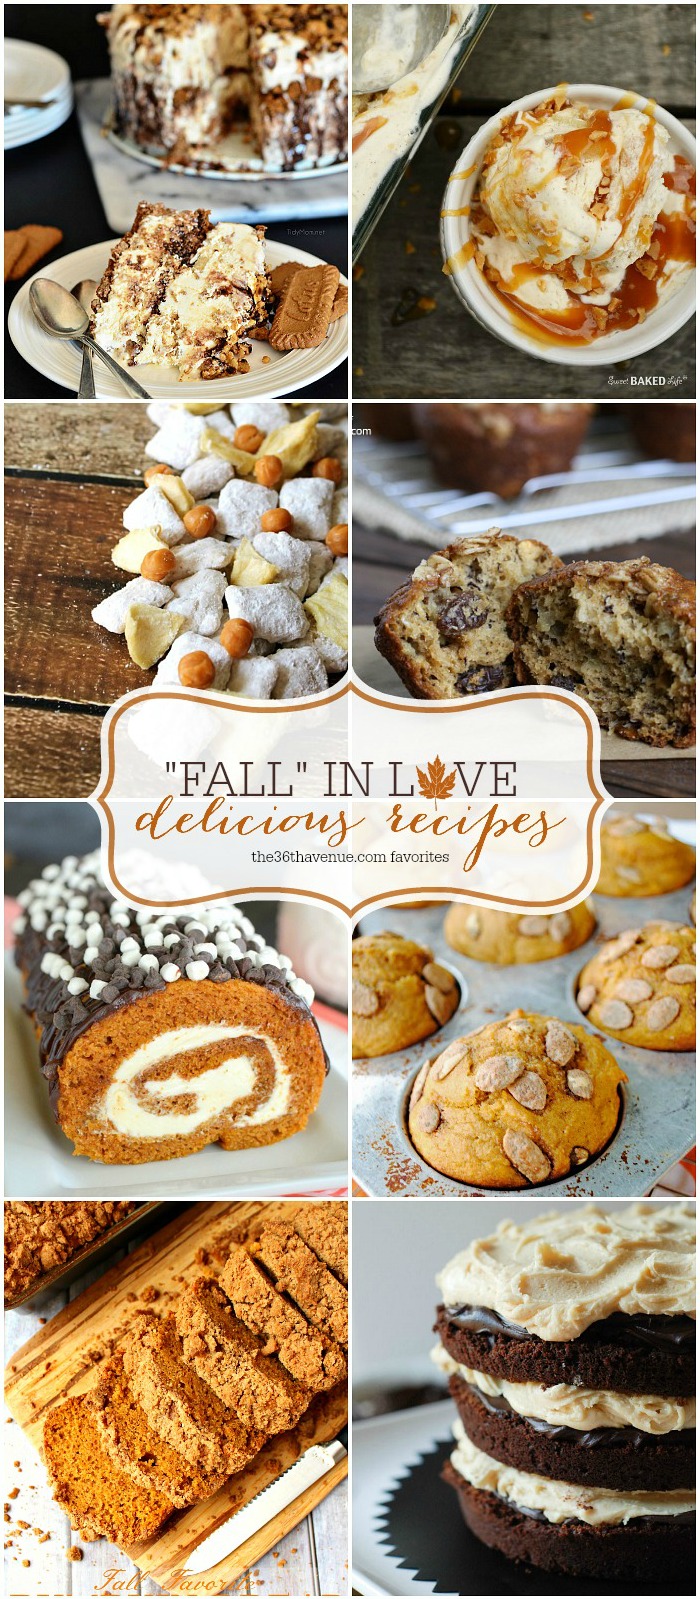 Recipes : Delicious and Easy Fall Recipes... Yum! { the36thavenue.com }